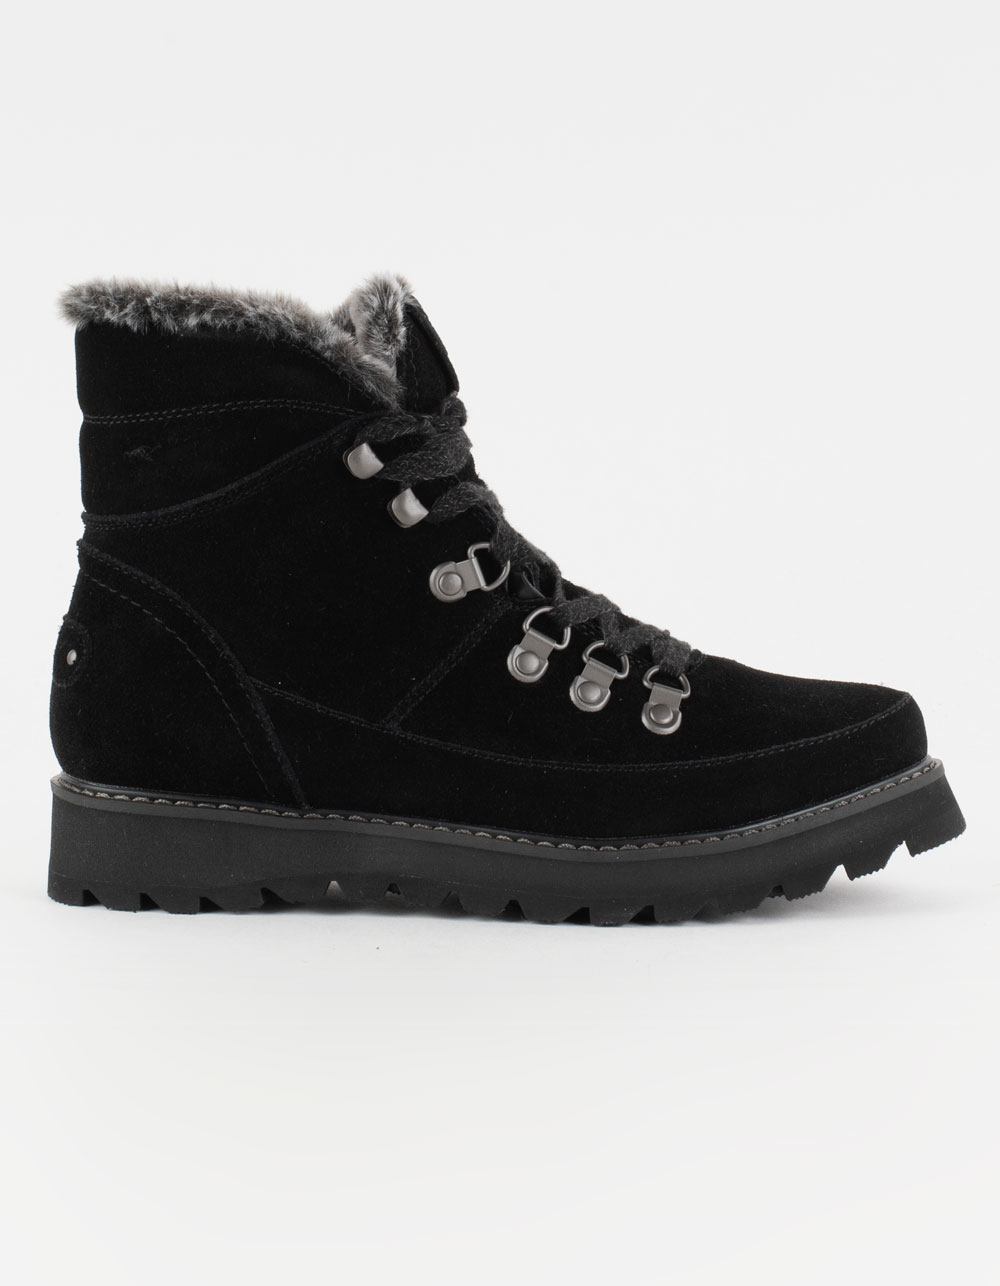 ROXY Sadie Womens Lace-Up Boots - BLACK | Tillys